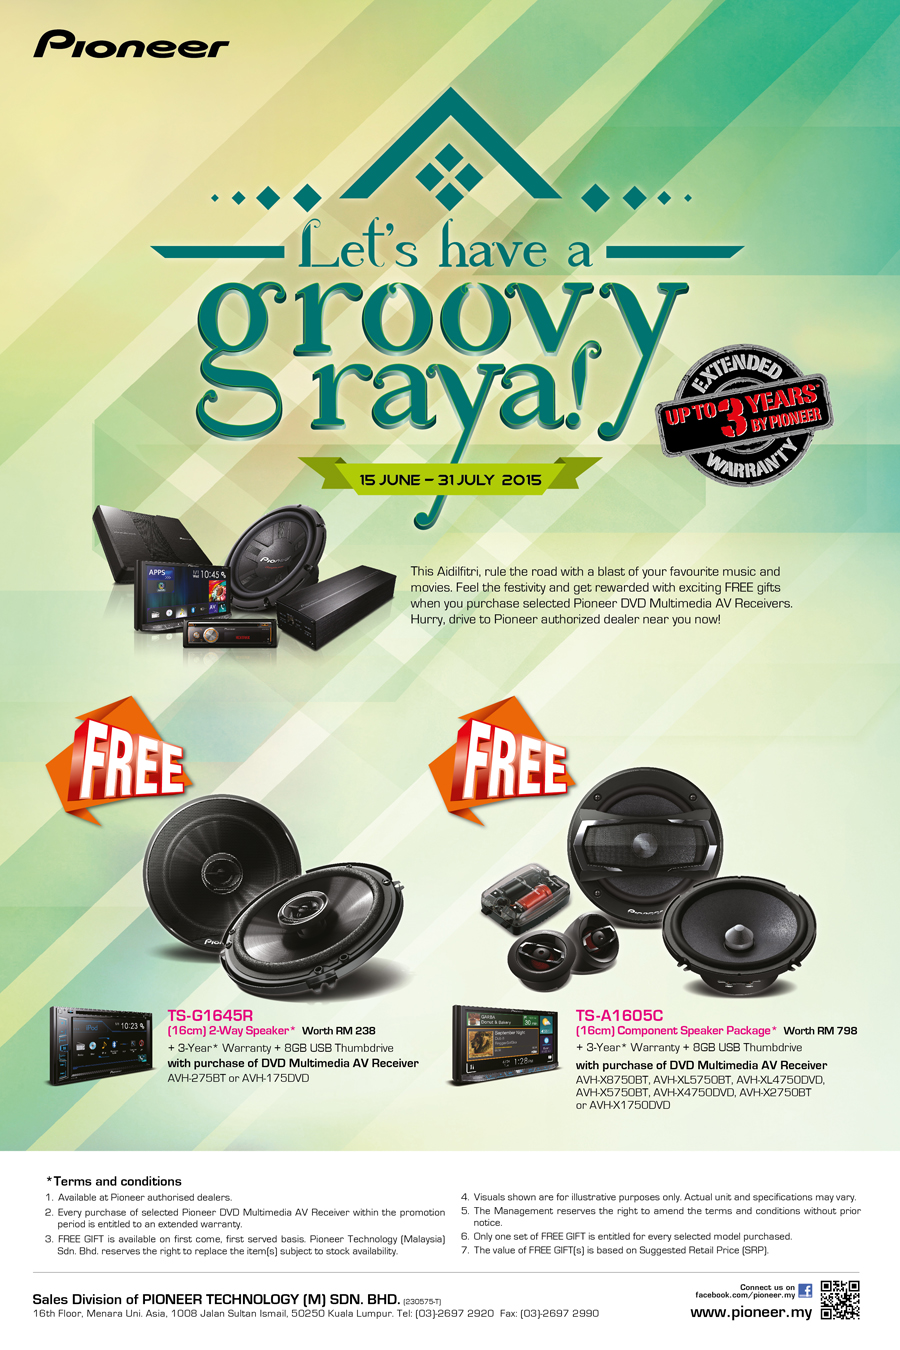 Pioneer Let's have a groovy raya promotion. Free gifts await.